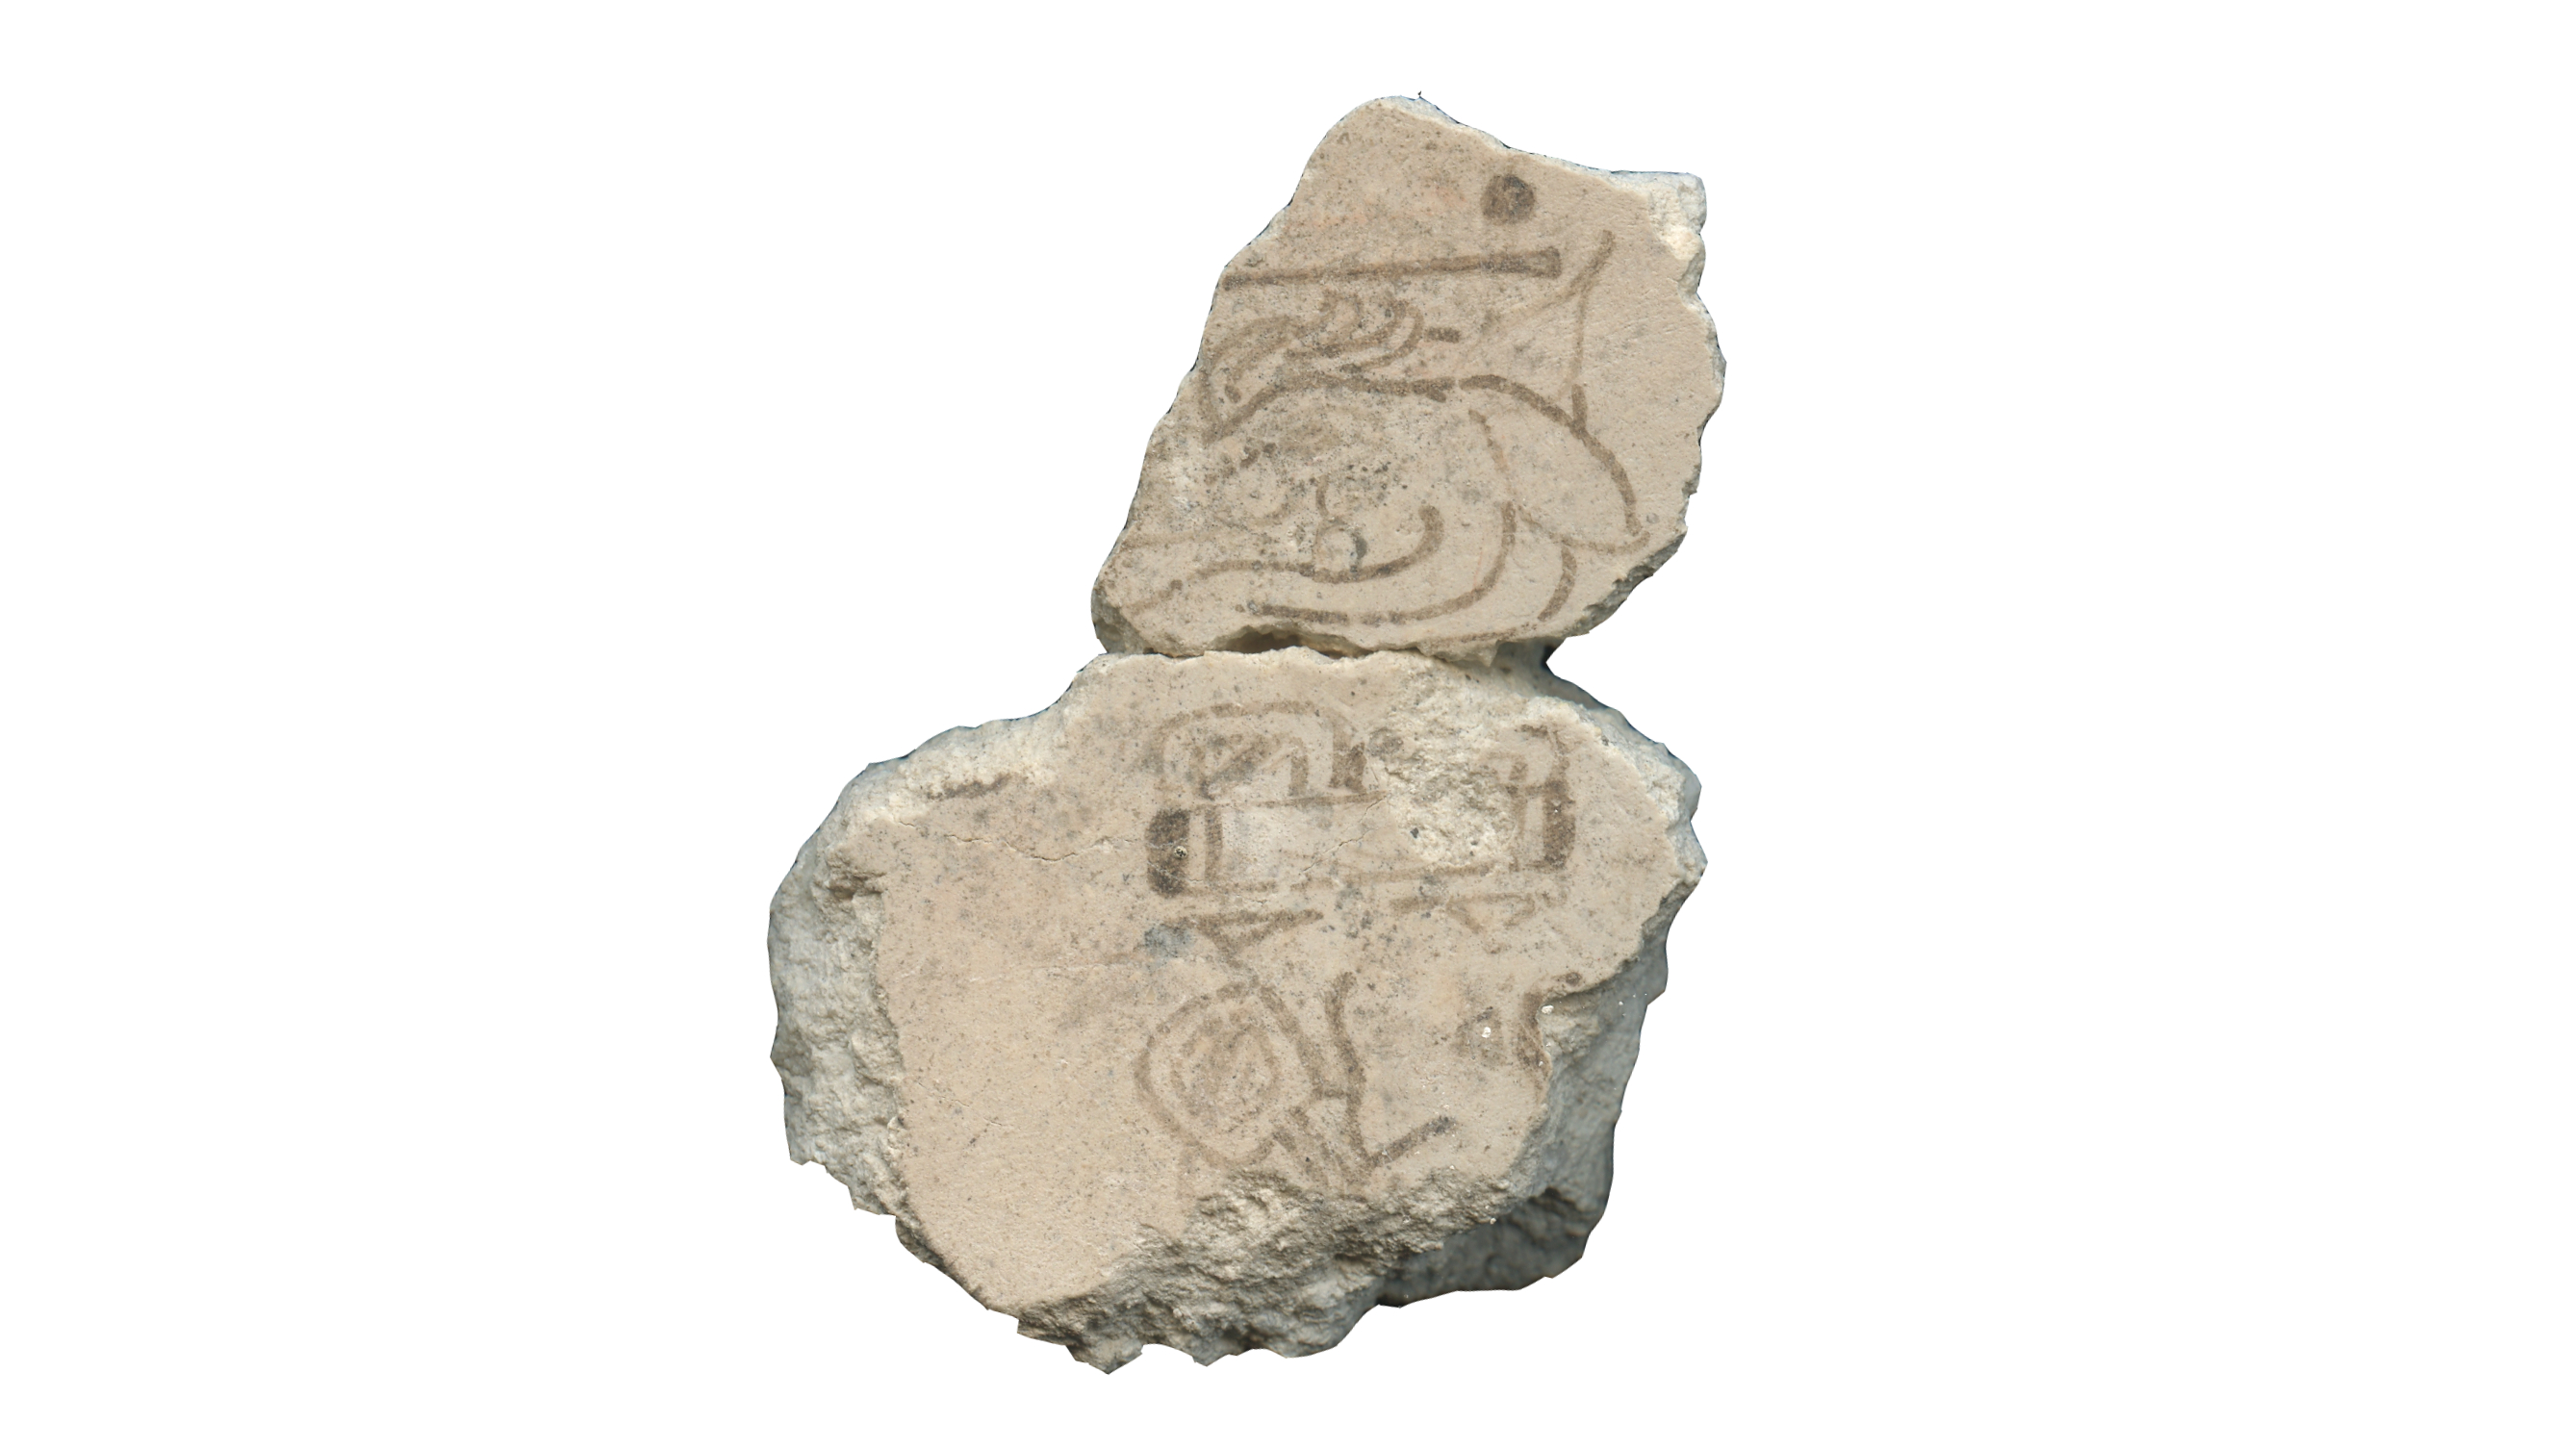 Detail of artifact number 4778 collected from the Fifth Sub-phase (c. 300-200 BC), marked with 7 Deer Day.